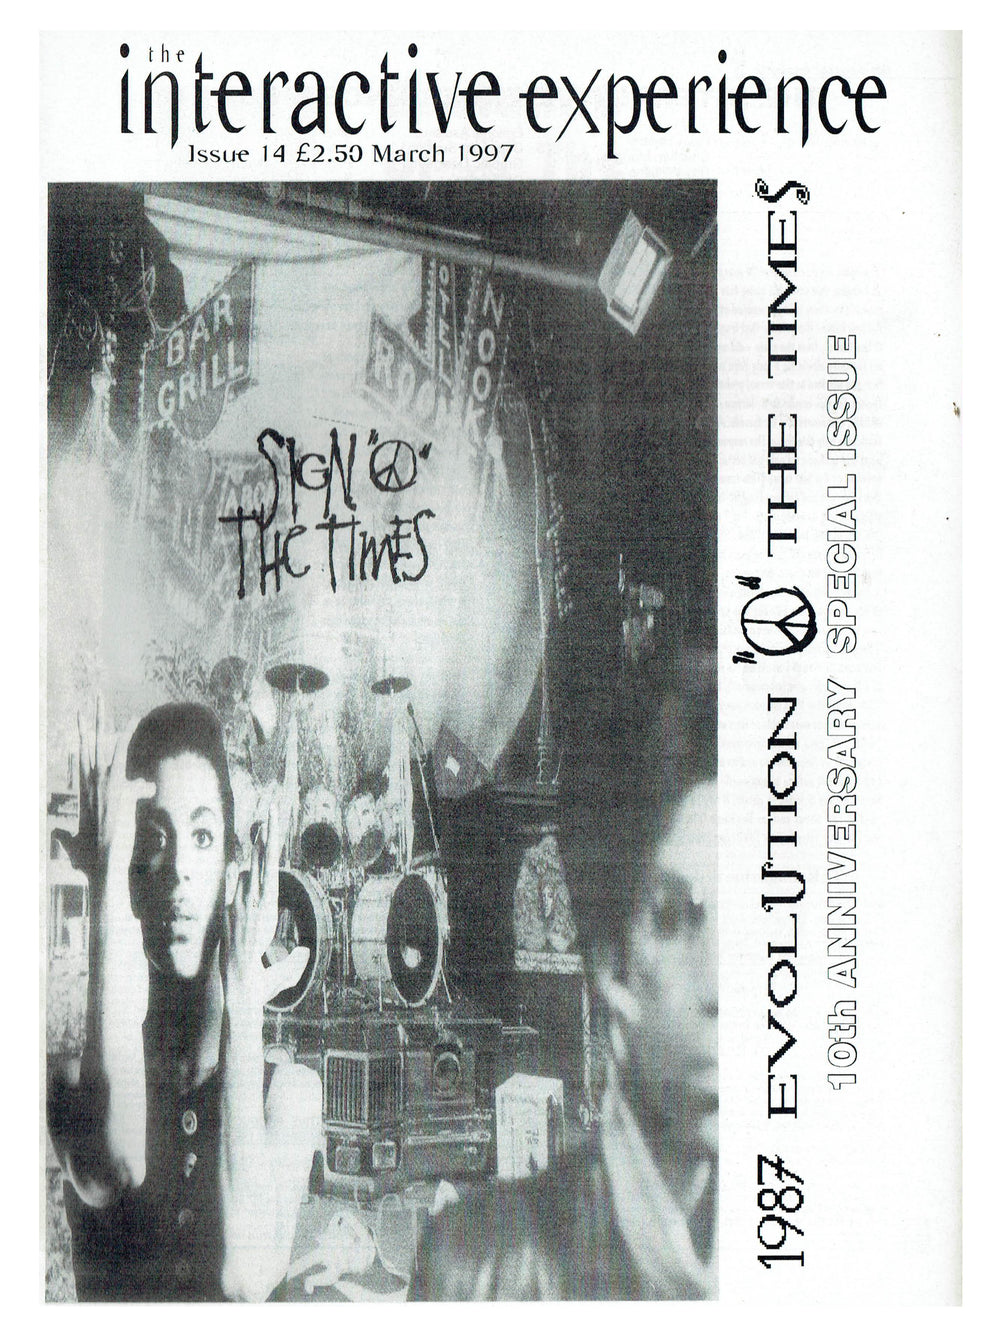 Prince – The Interactive Experience Prince Fanzine Publication Issue 14 March 1997